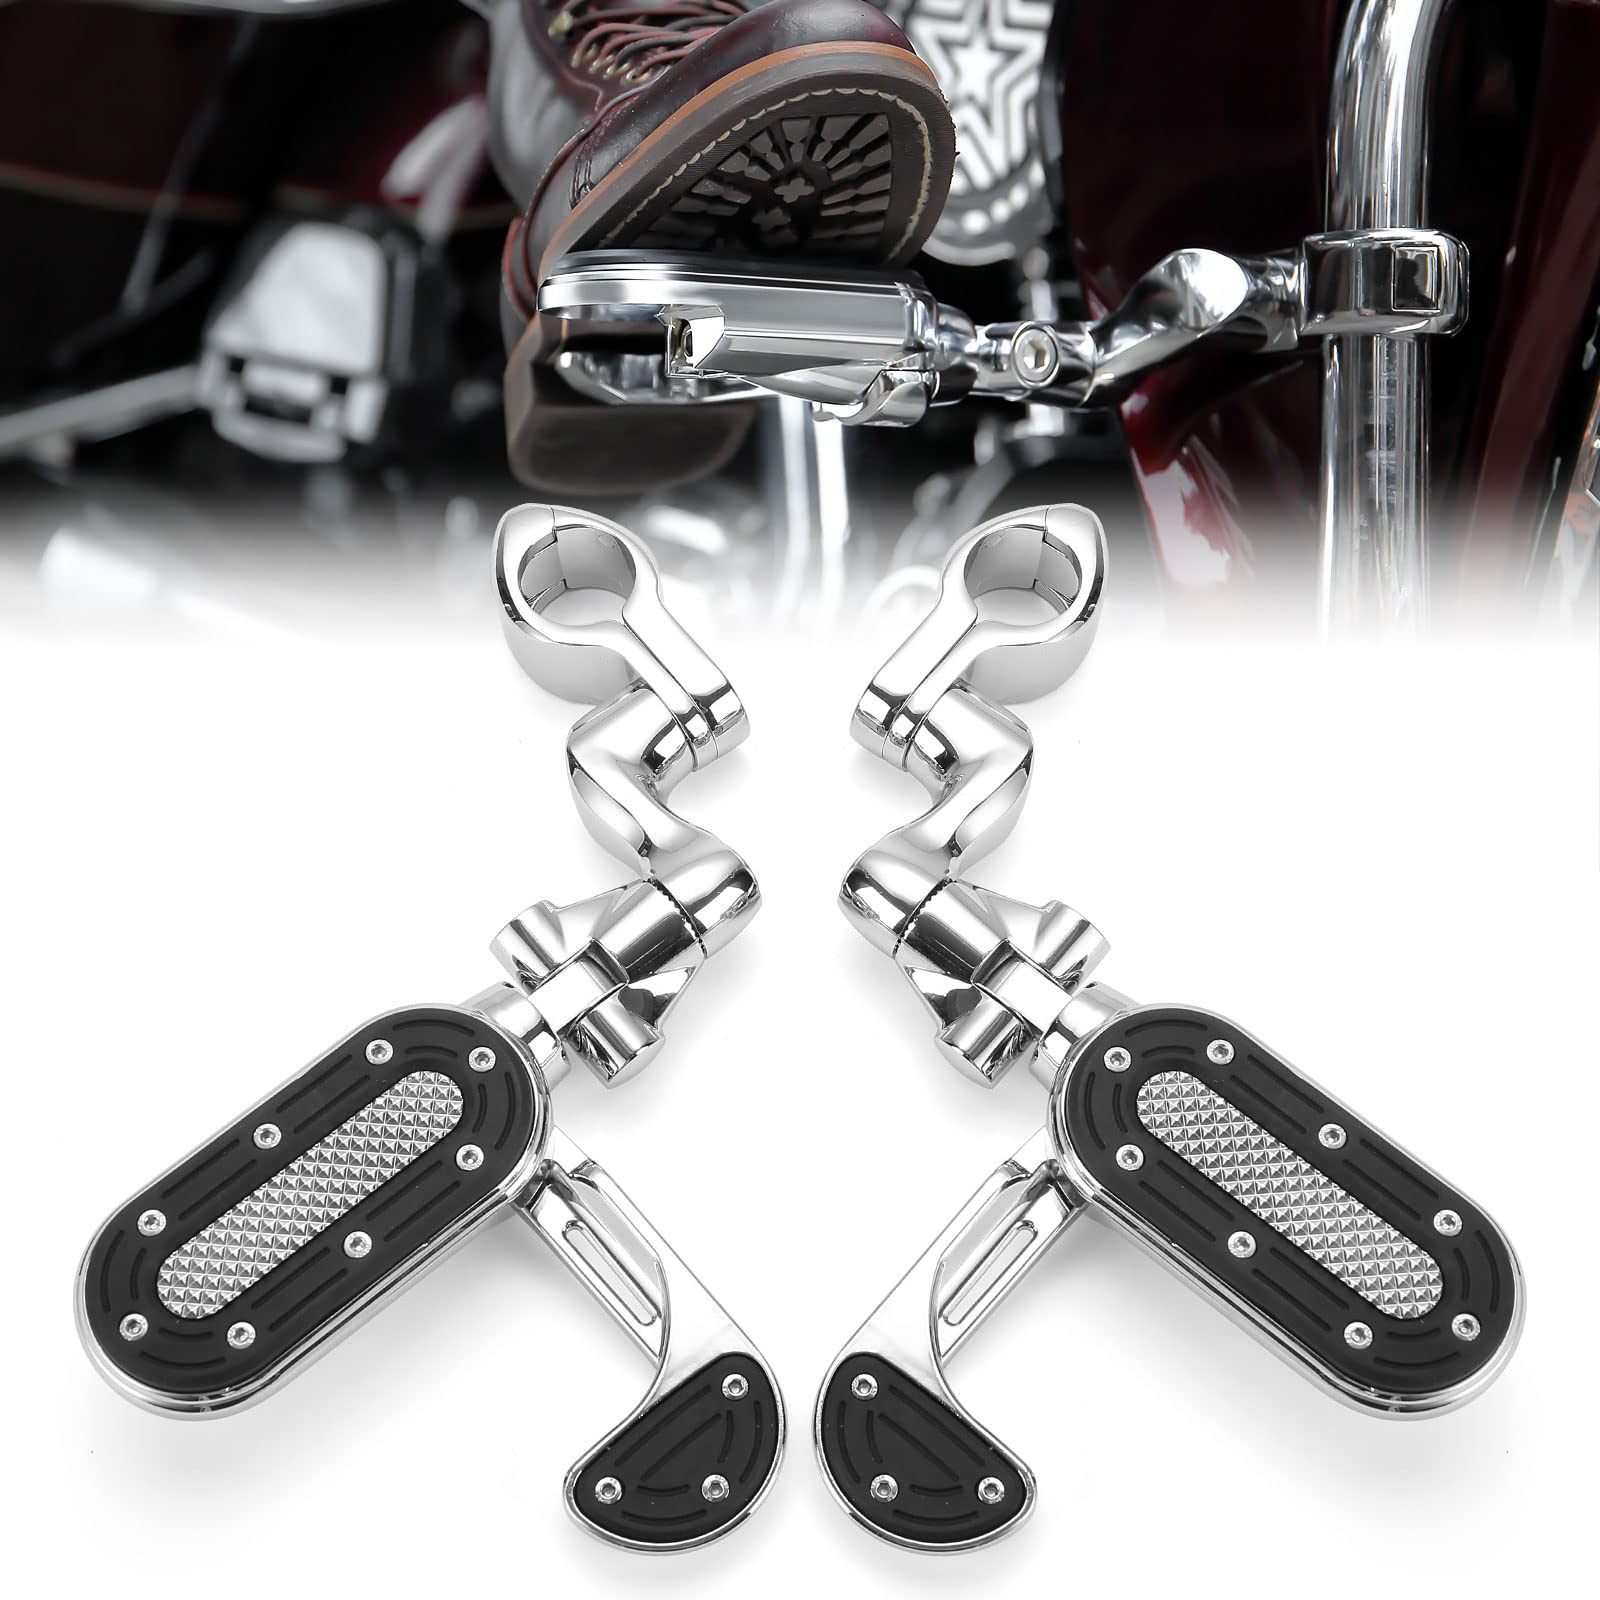 Highway Pegs For Motorcycles – Kemimoto